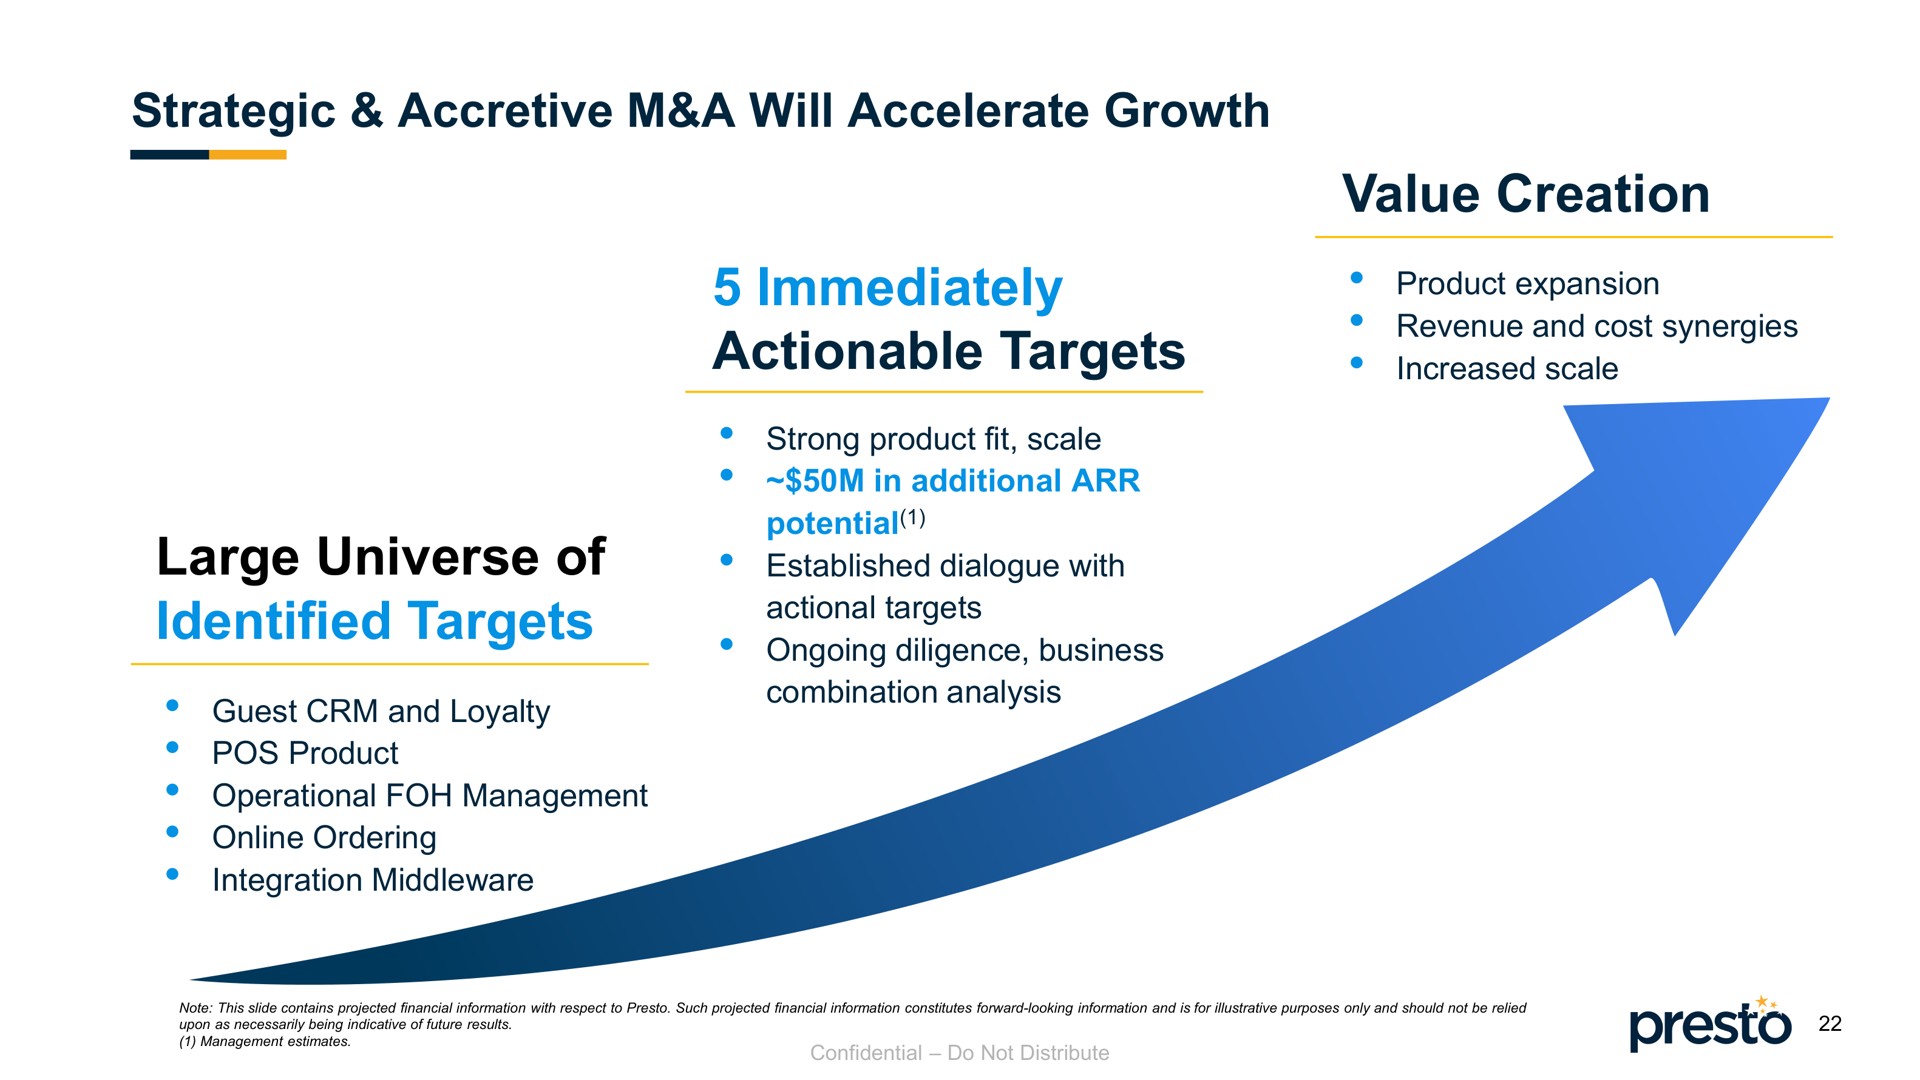 value creation strategic accretive a will accelerate growth immediately actionable targets large universe of identified targets actional | Presto